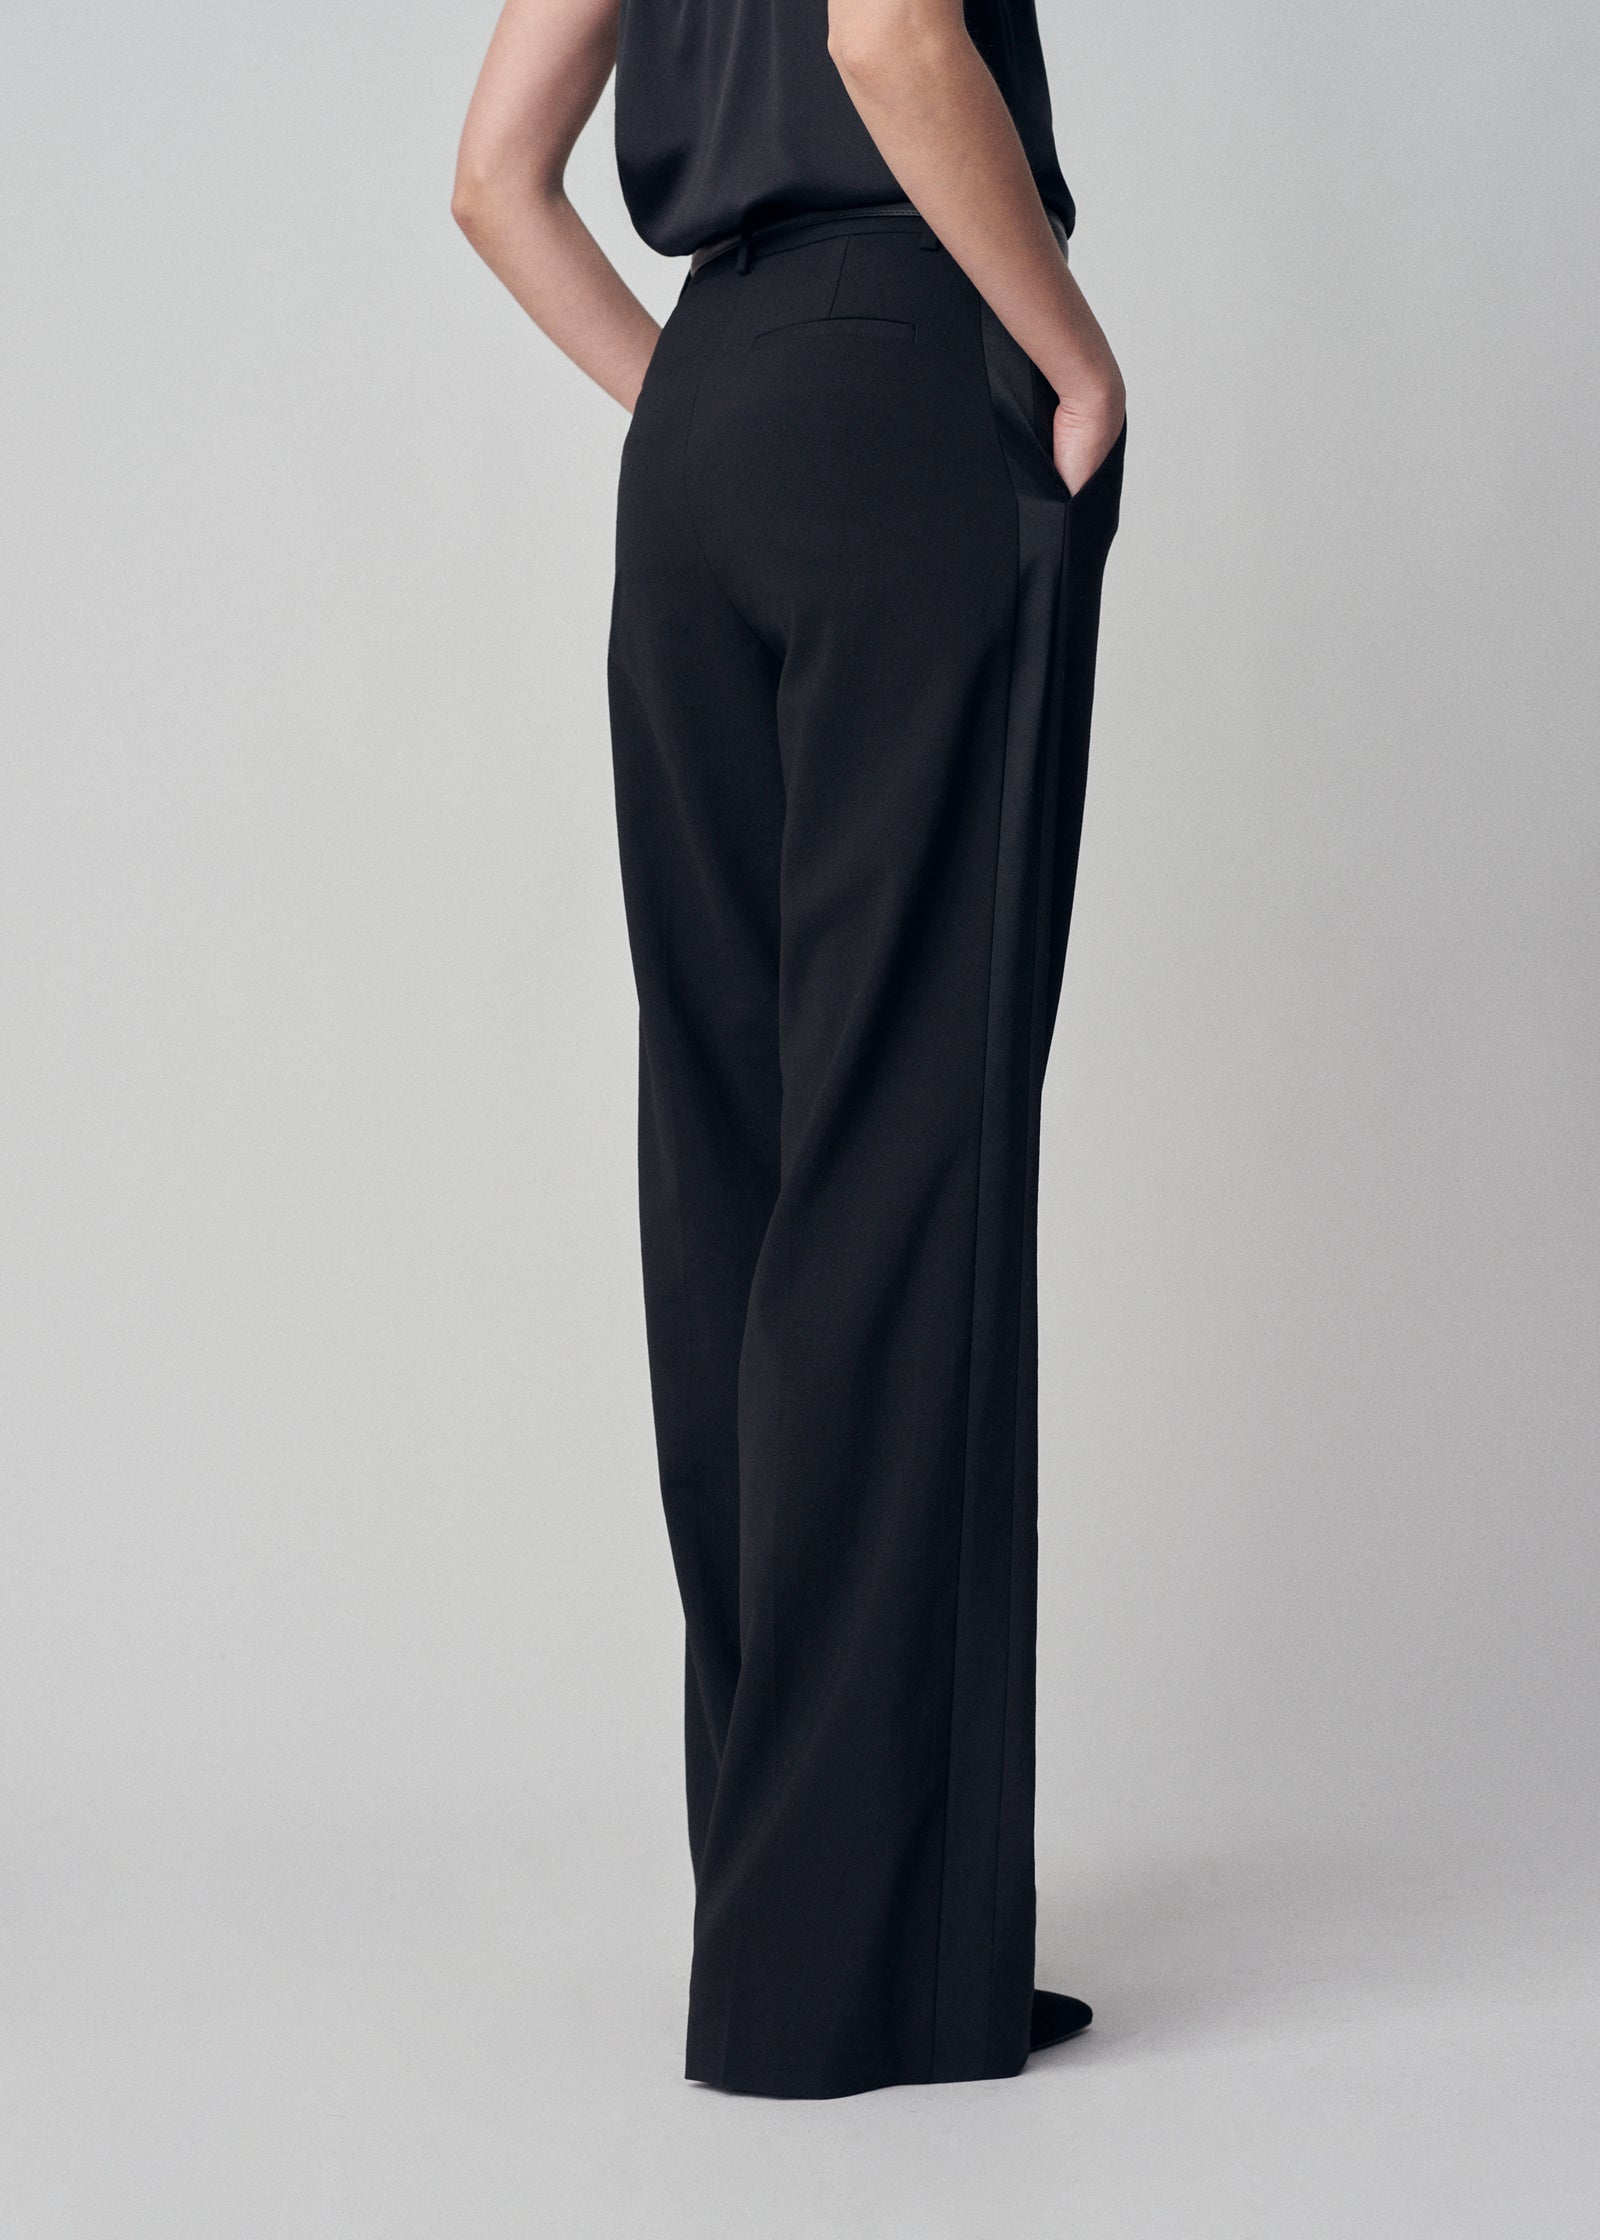 Tuxedo Pant in Virgin Wool - Black - CO Collections